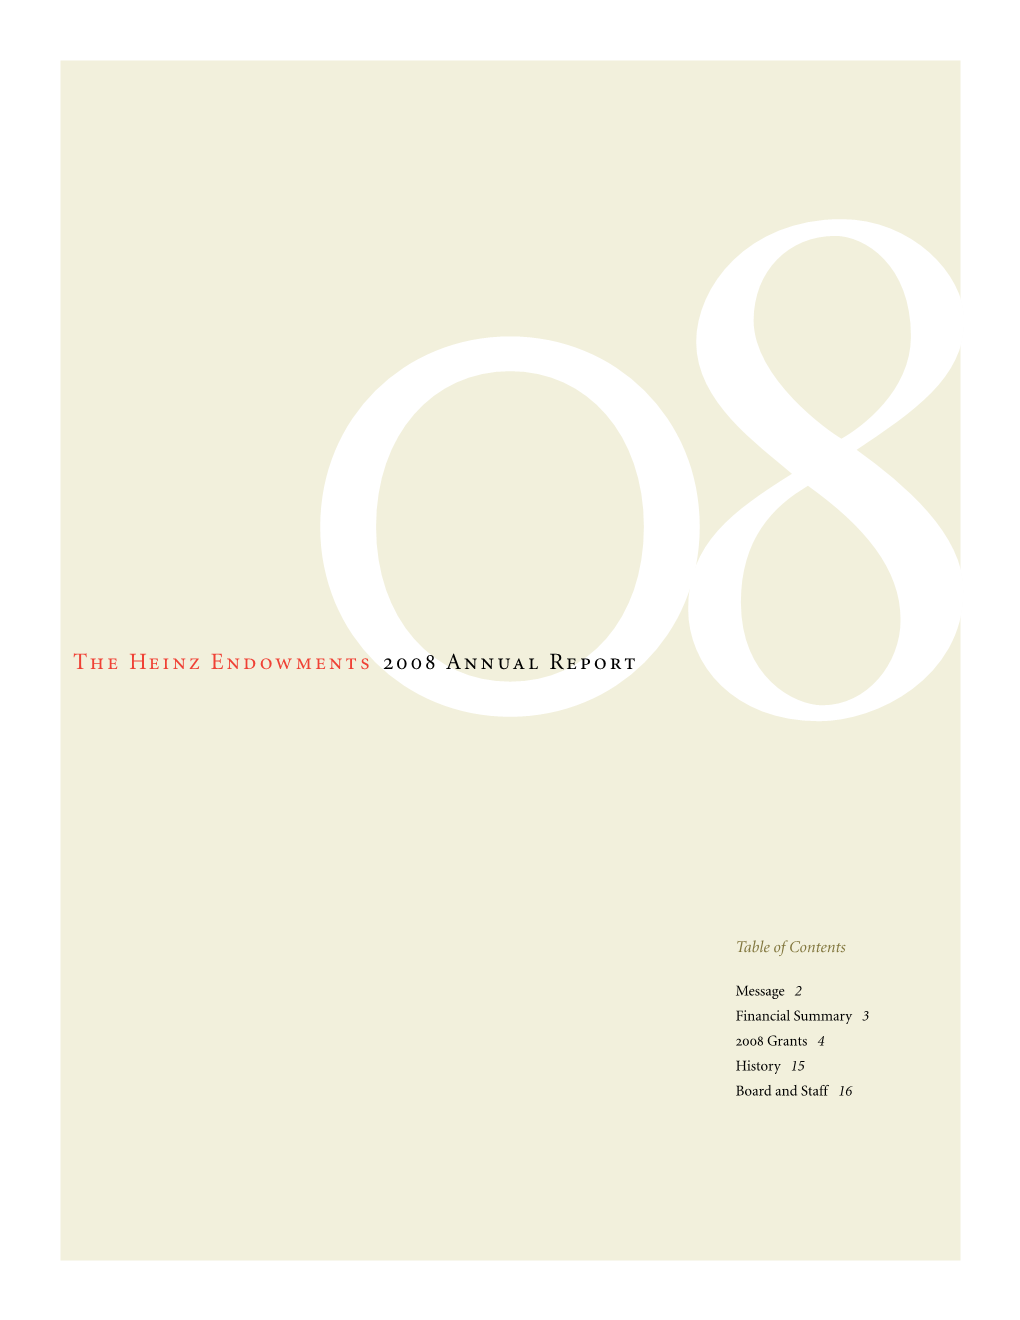 08The Heinz Endowments 2008 Annual Report